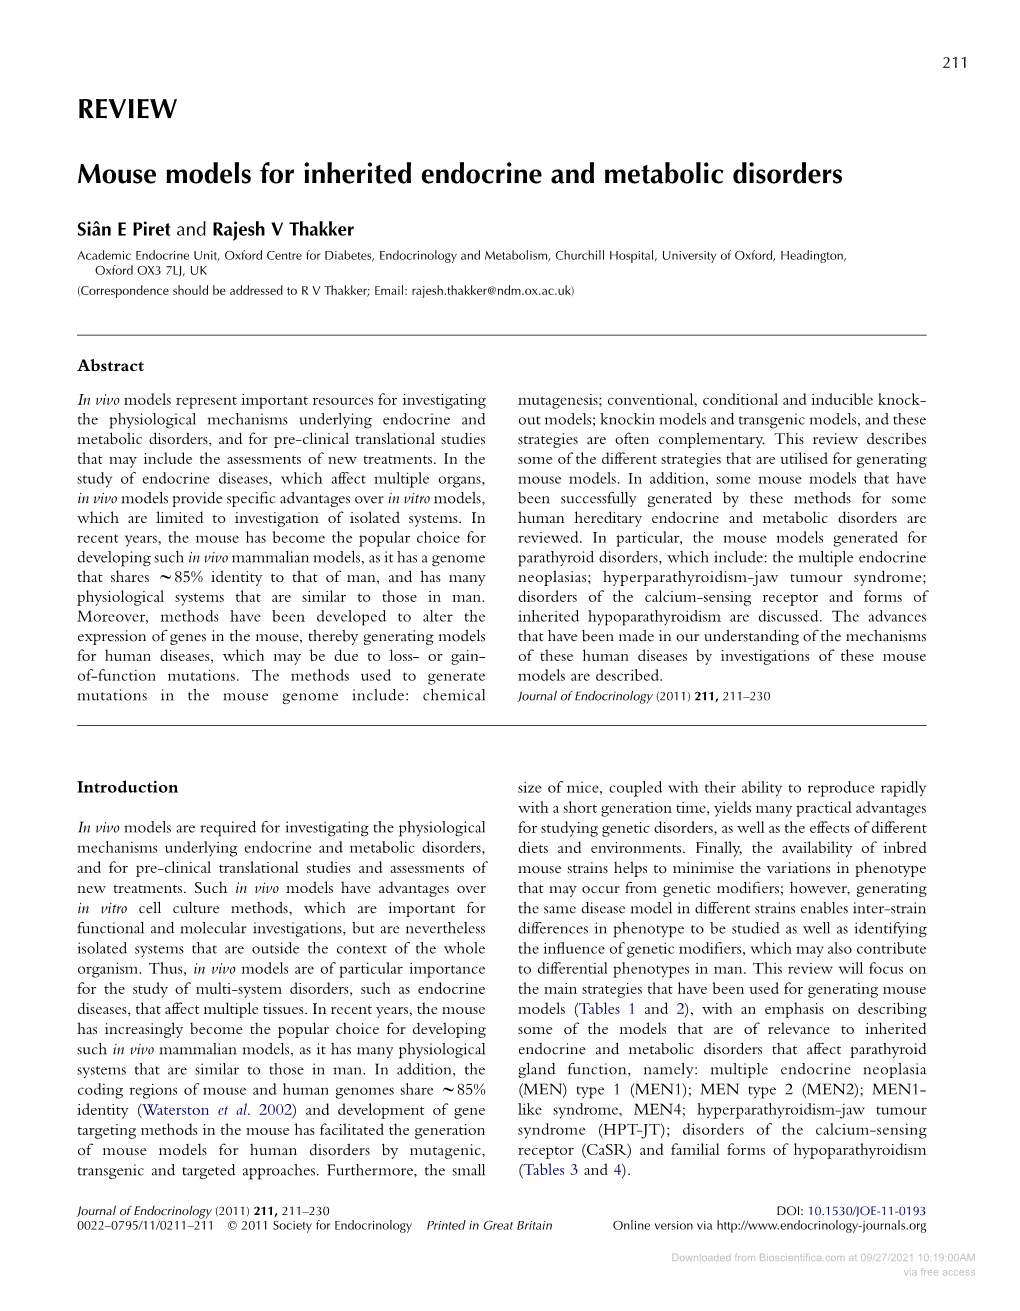 REVIEW Mouse Models for Inherited Endocrine and Metabolic Disorders